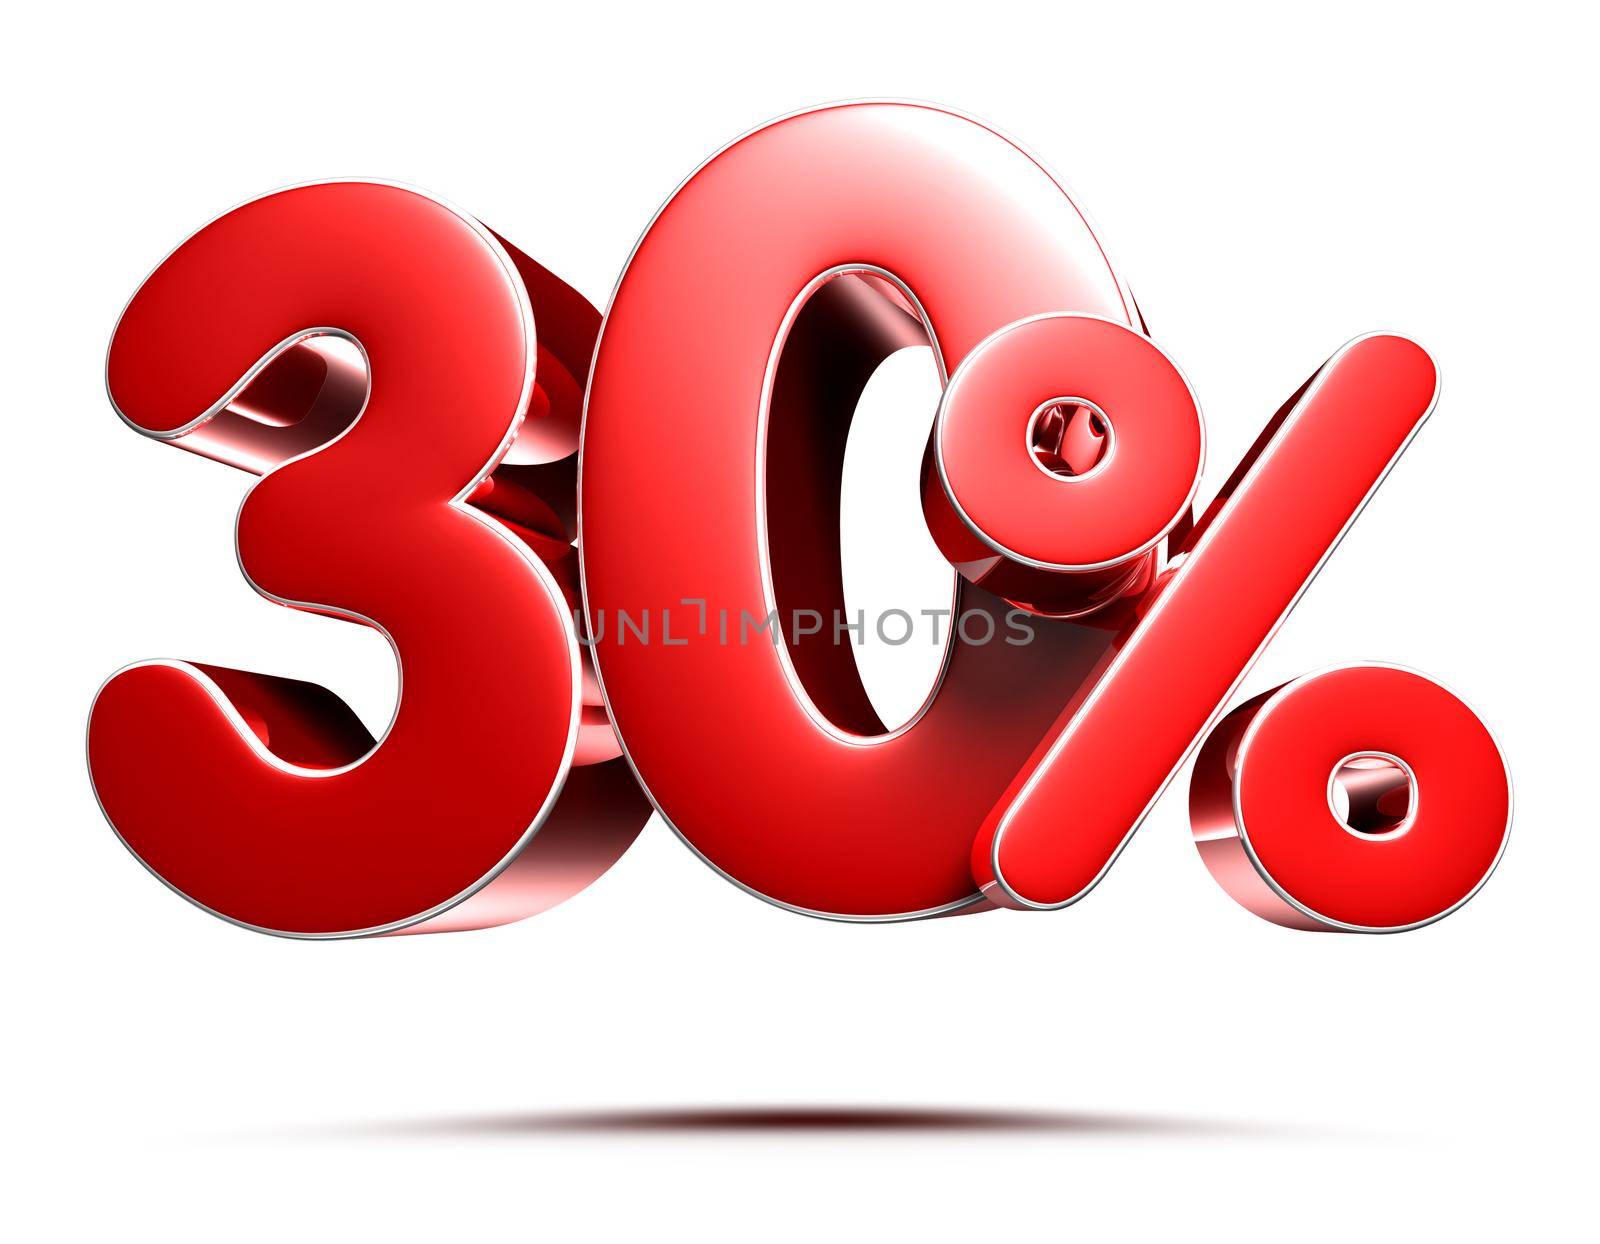 30 percent red 3D illustration on white background with clipping path.